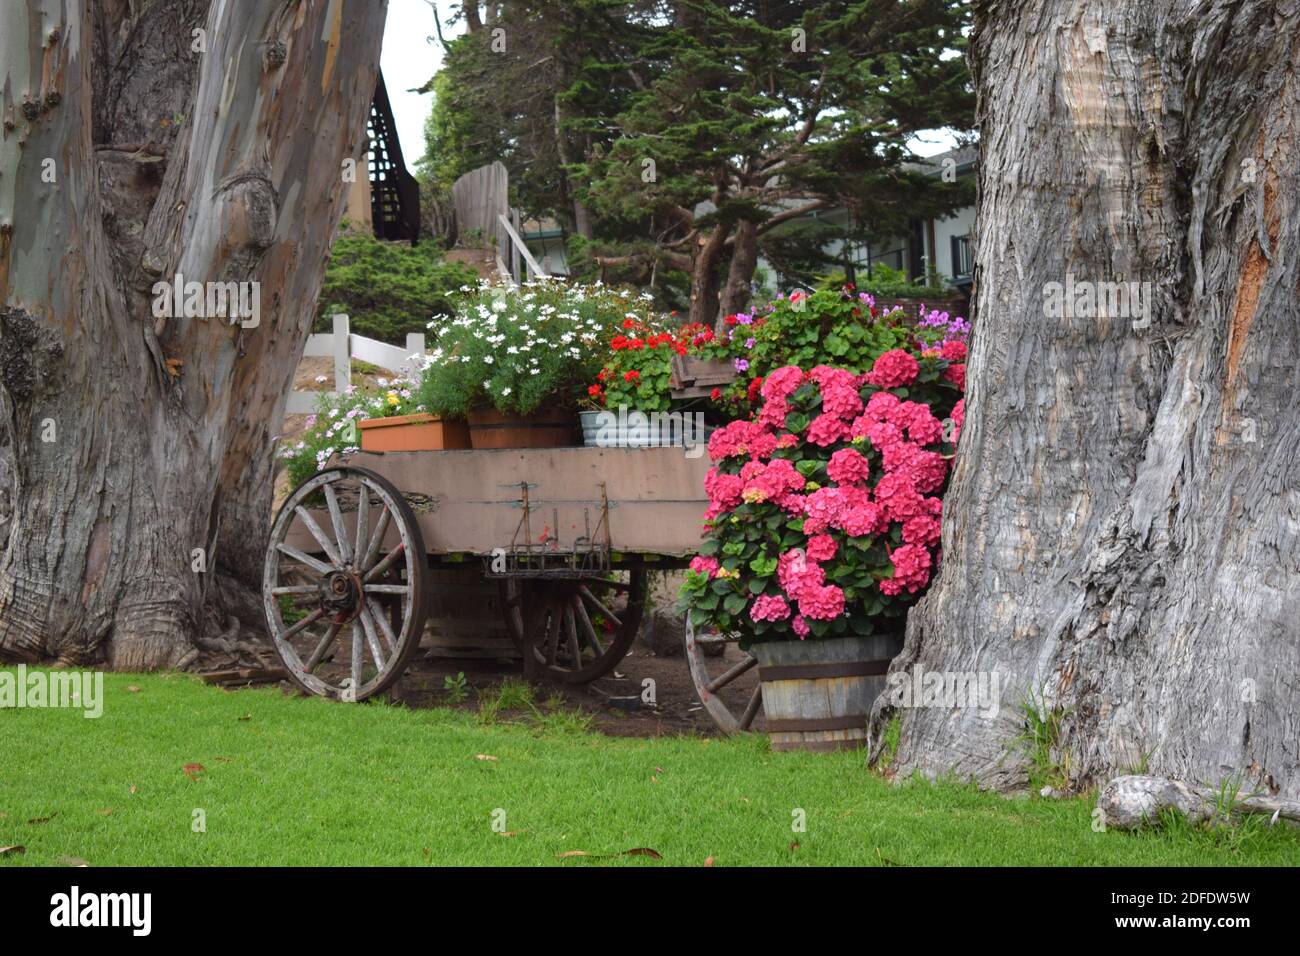 Carmel by the Sea, CA Banque D'Images